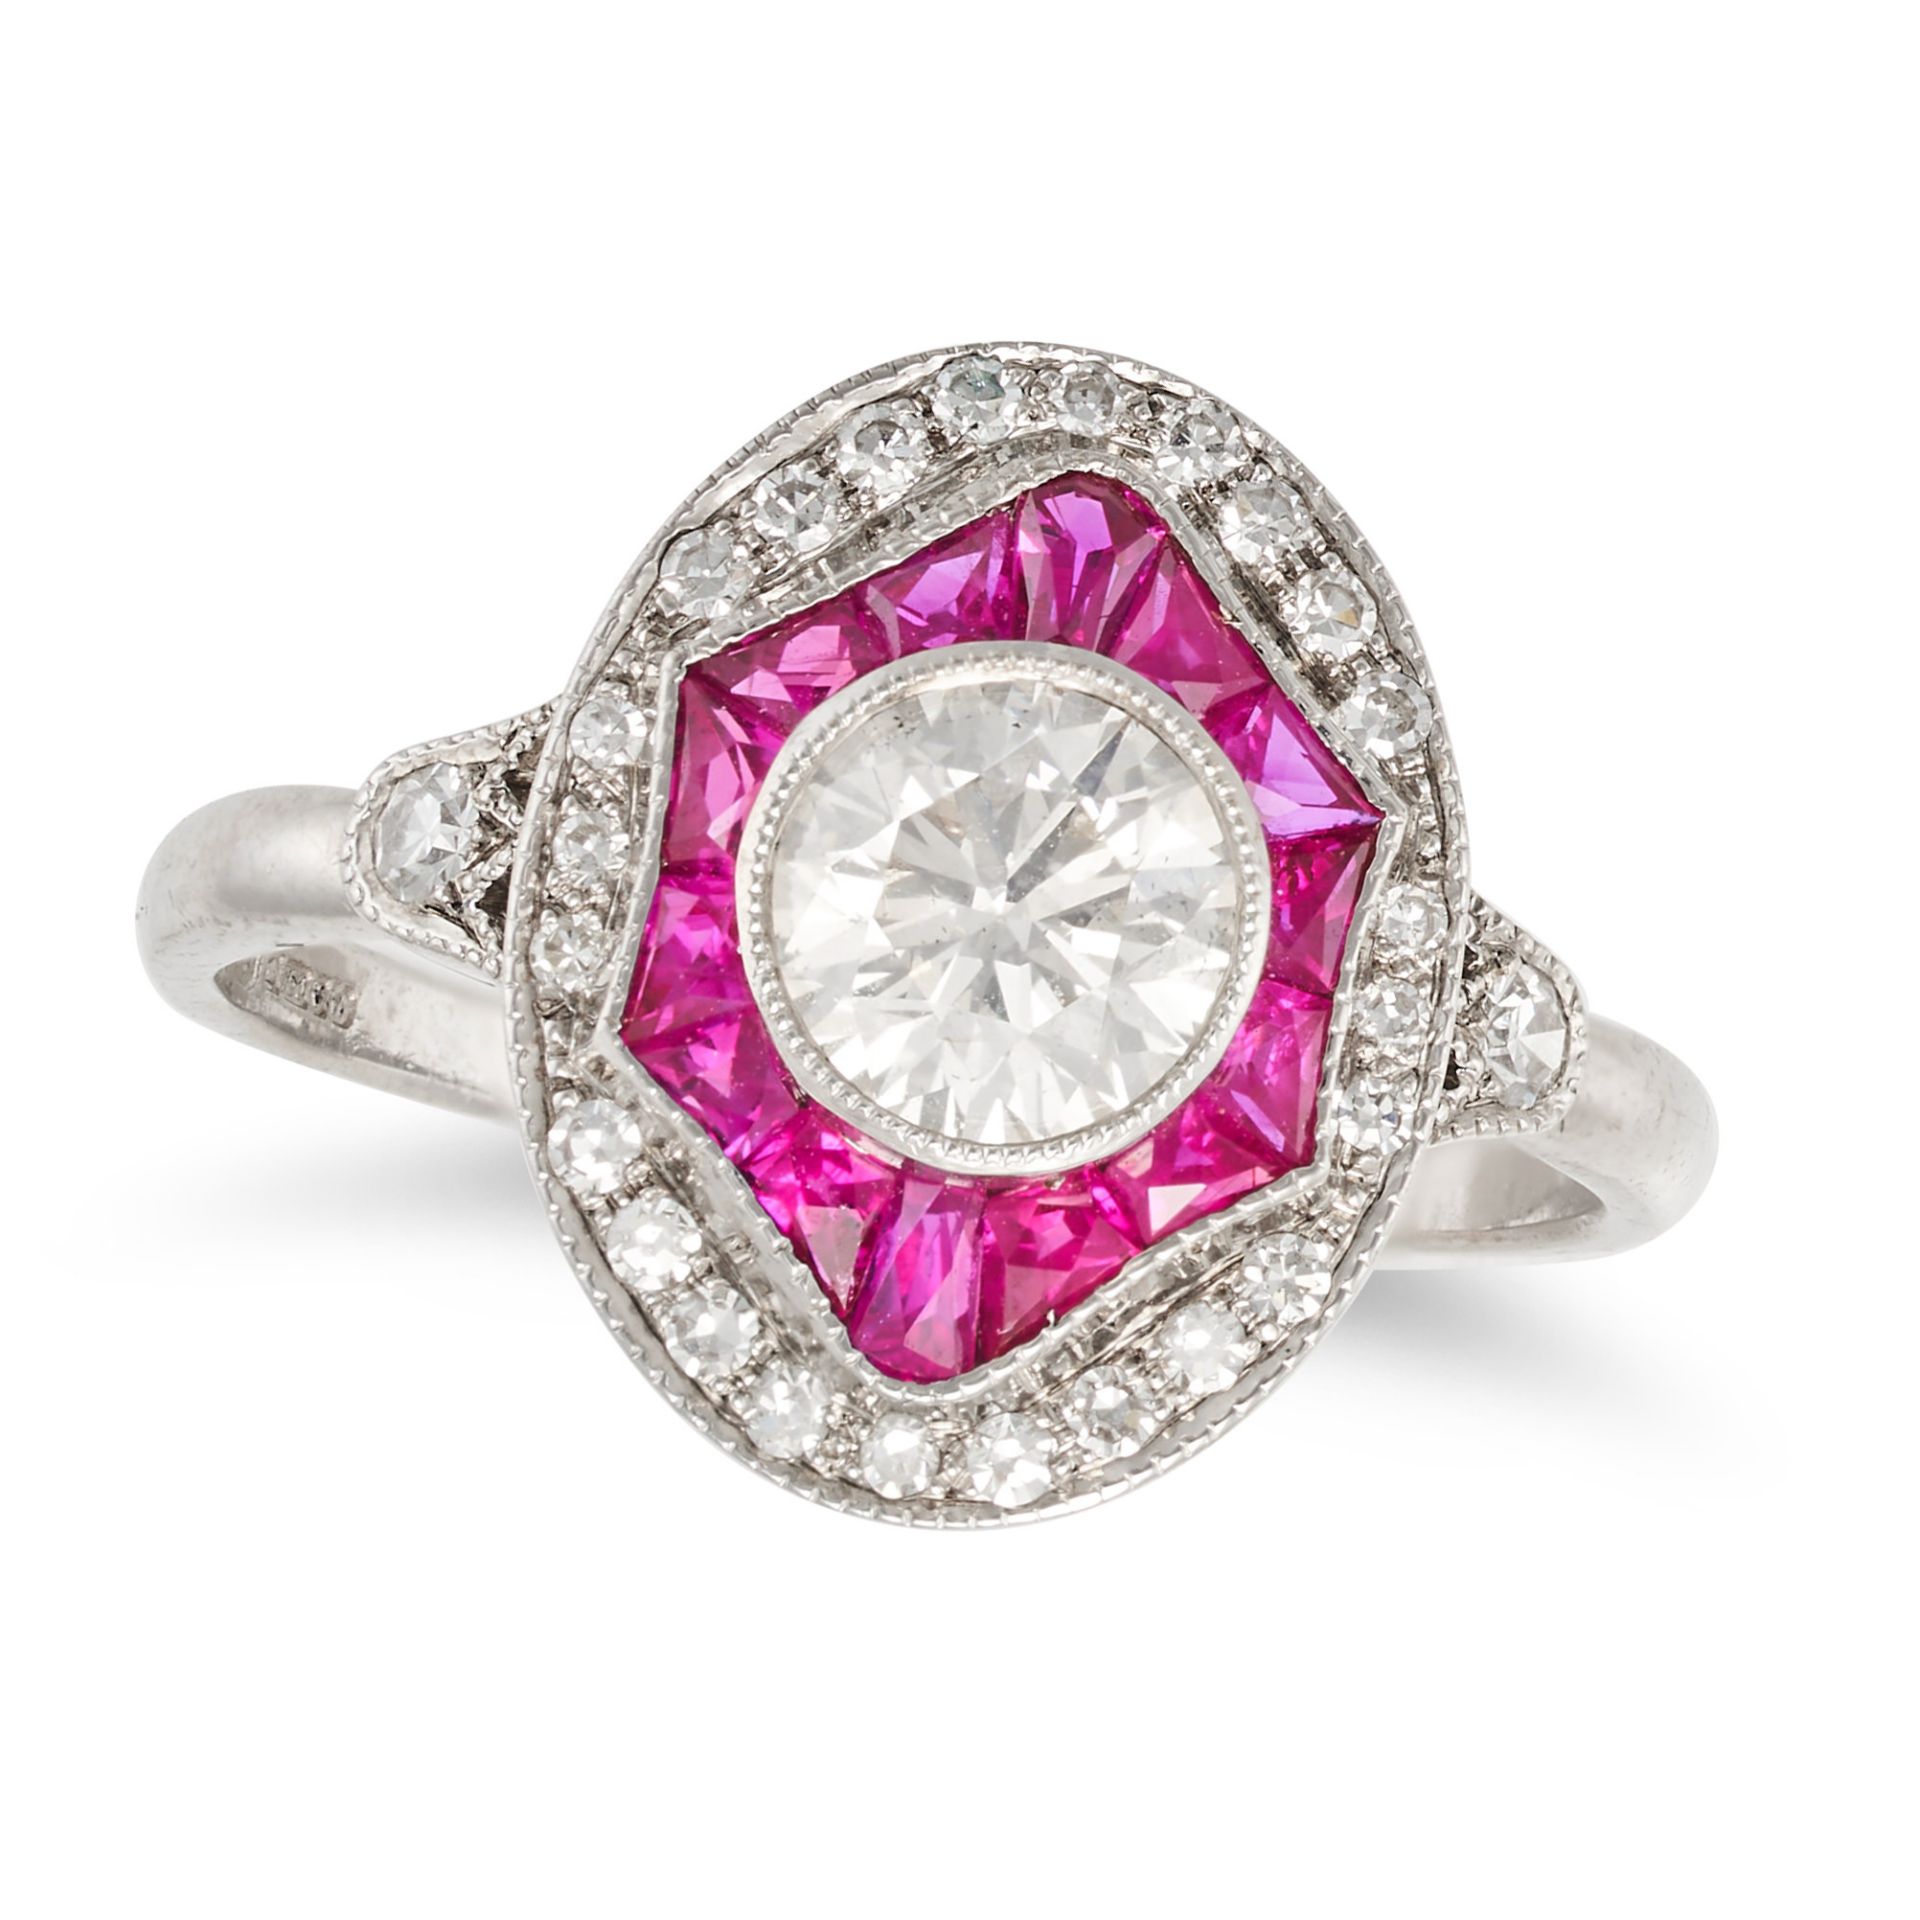 NO RESERVE - A RUBY AND DIAMOND TARGET RING in 18ct white gold, set with a round brilliant cut di...